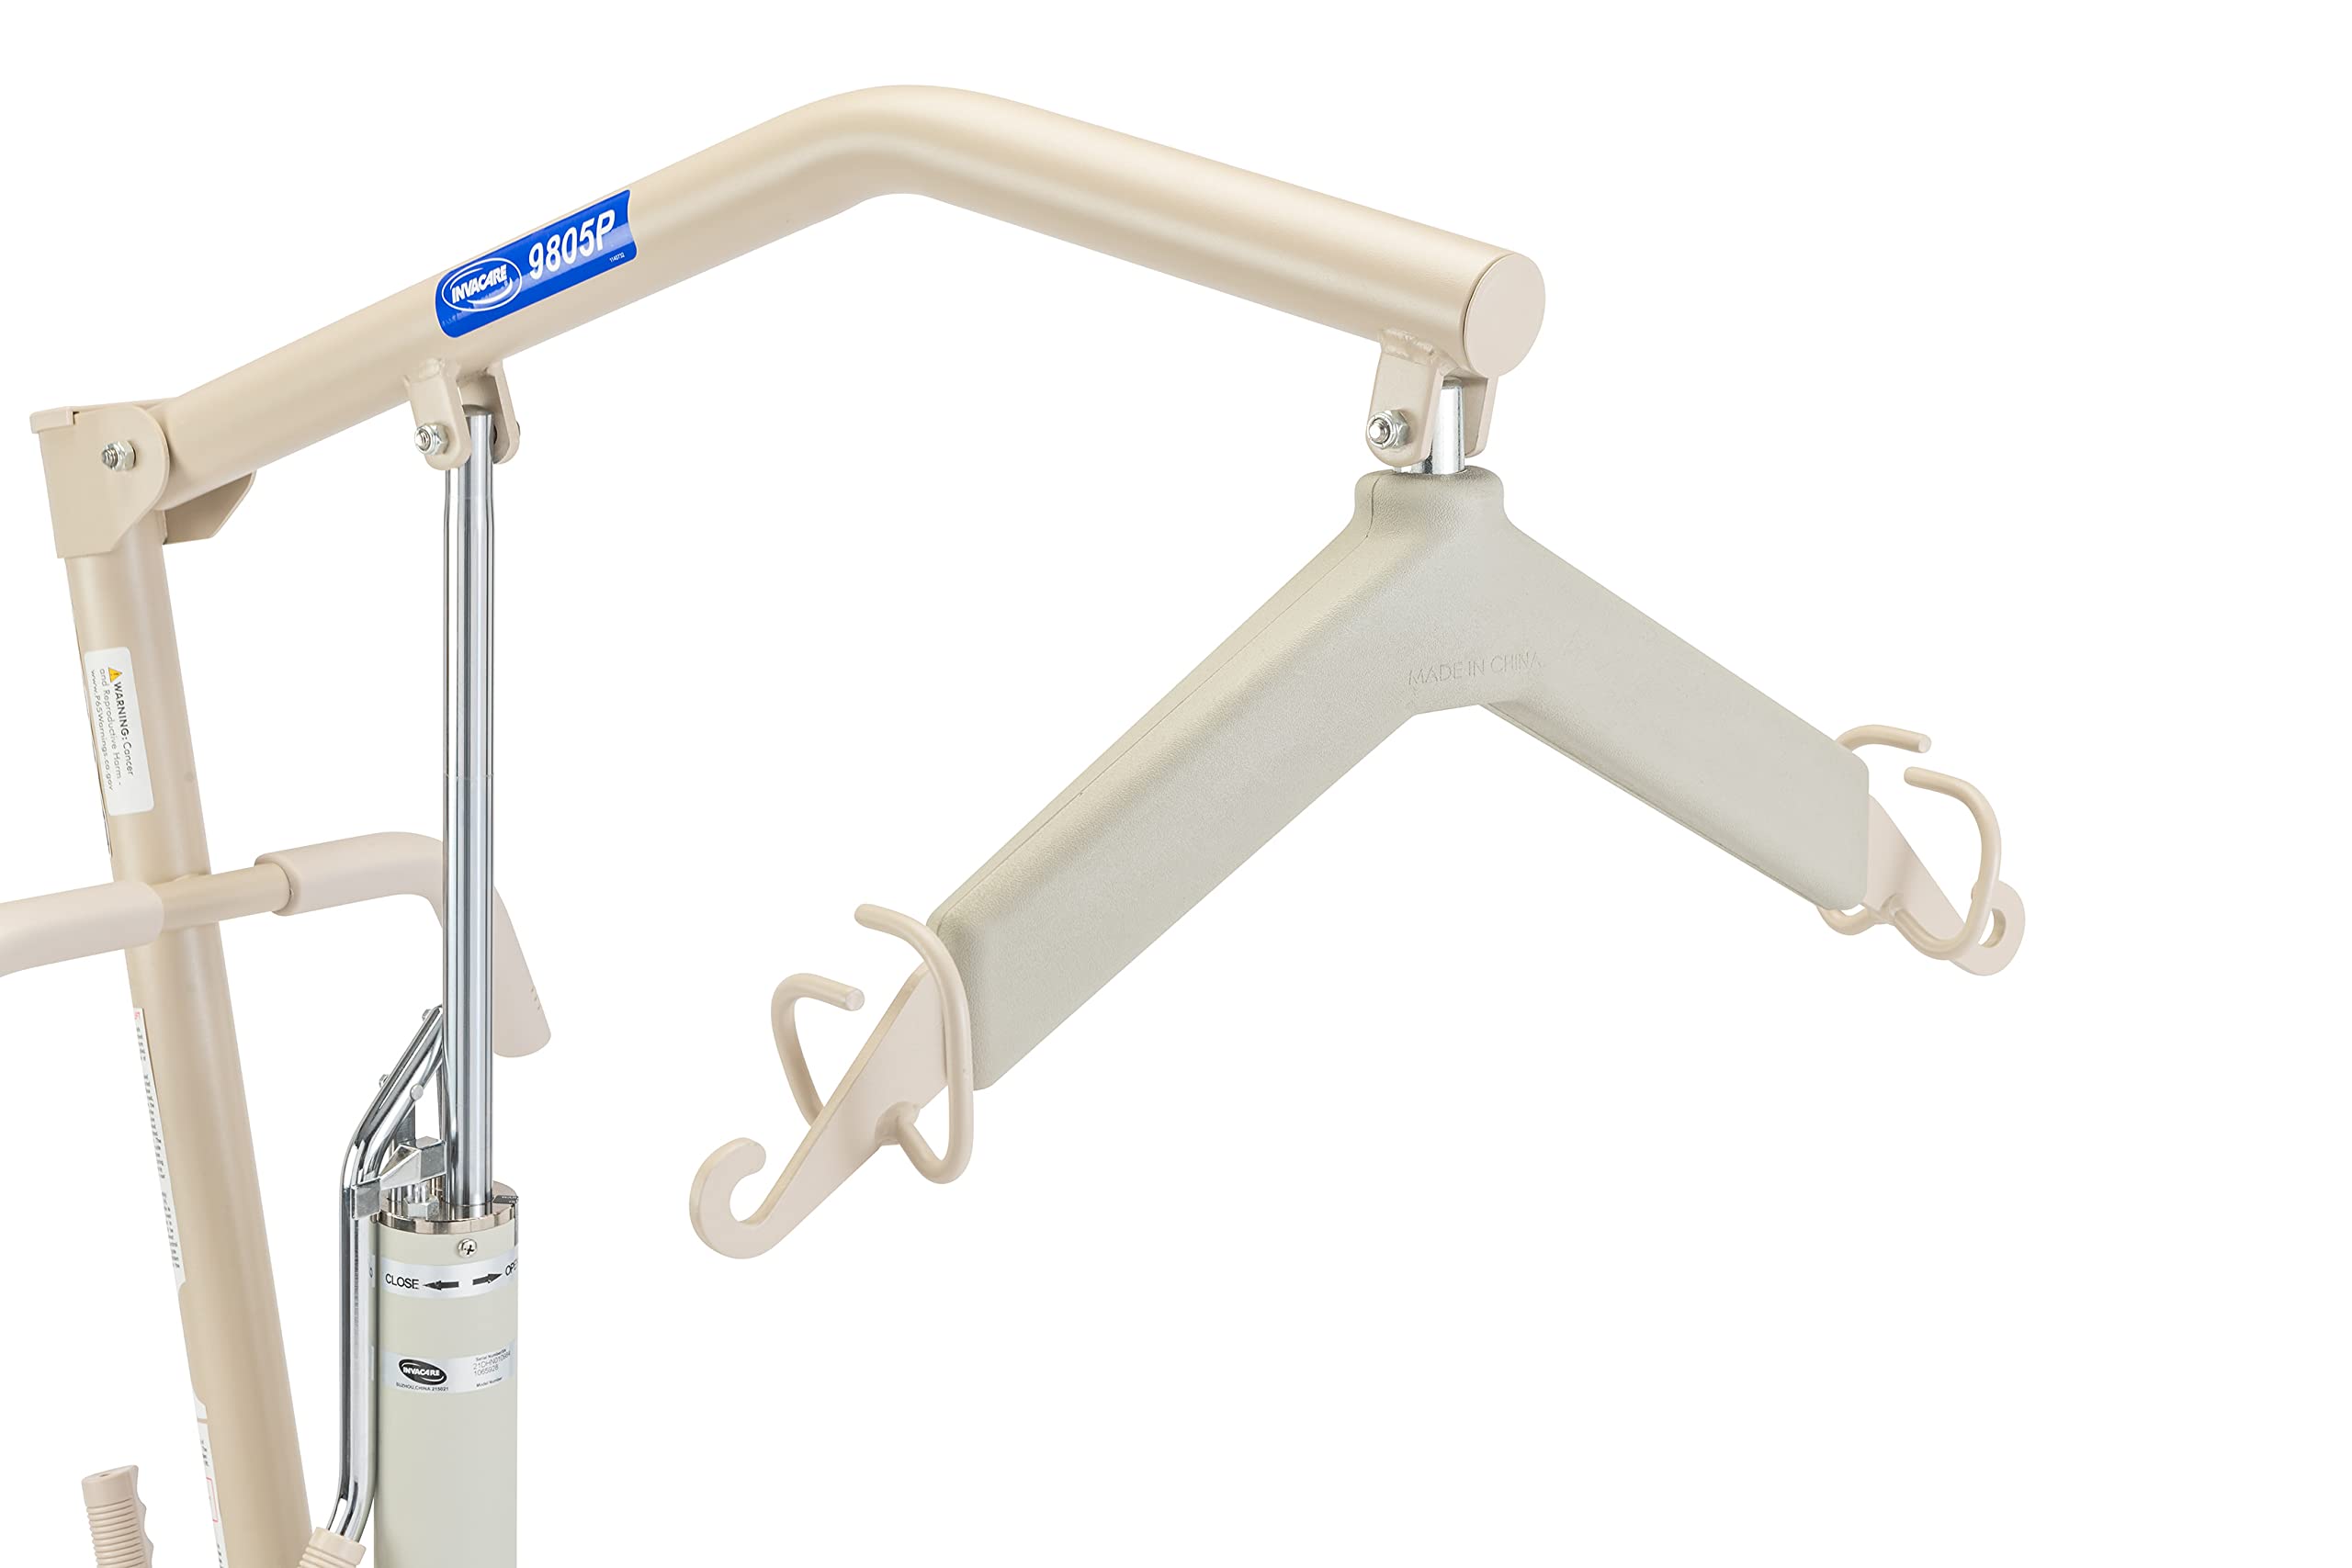 Invacare Lightweight Hydraulic Patient Lift, Beige, 450 lb. Weight Capacity, 9805P